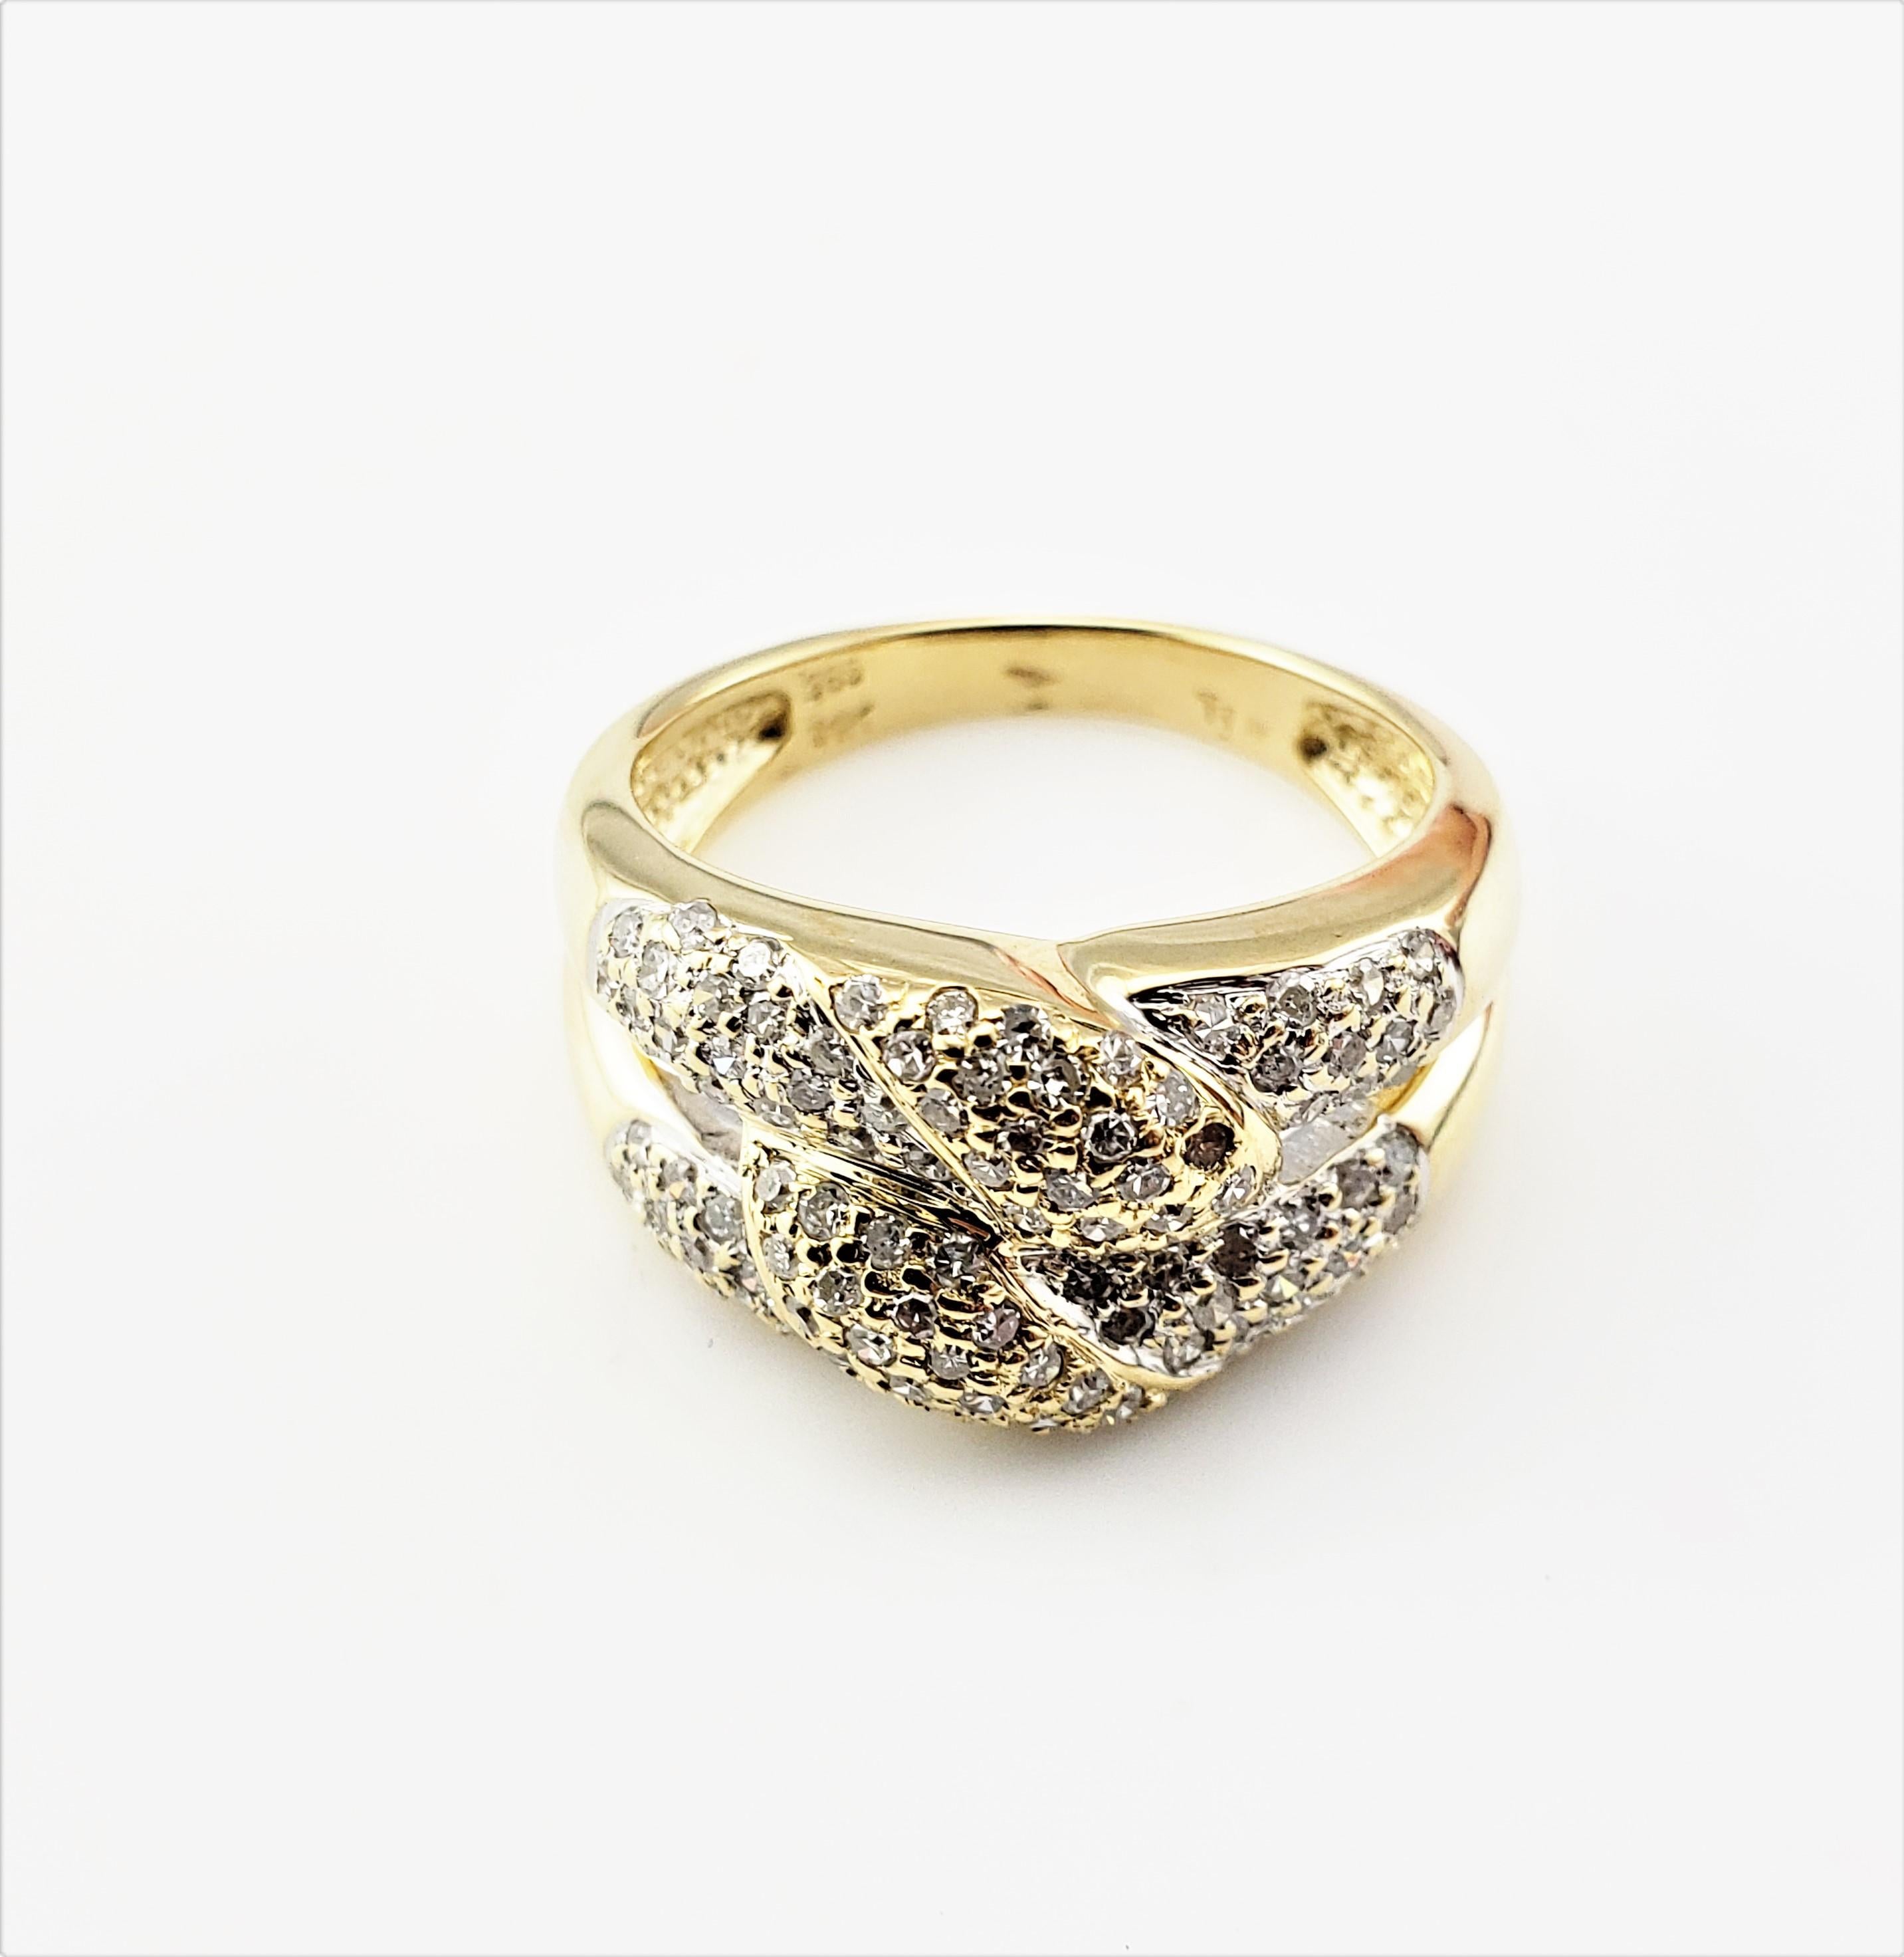 Vintage 14 Karat Yellow Gold Diamond Knot Ring Size 7-

This sparkling ring features 105 round single cut diamonds set in an elegant knot design. Shank: 3 mm. Width: 11 mm.

Approximate total diamond weight: 1 ct.

Diamond color: I

Diamond clarity: